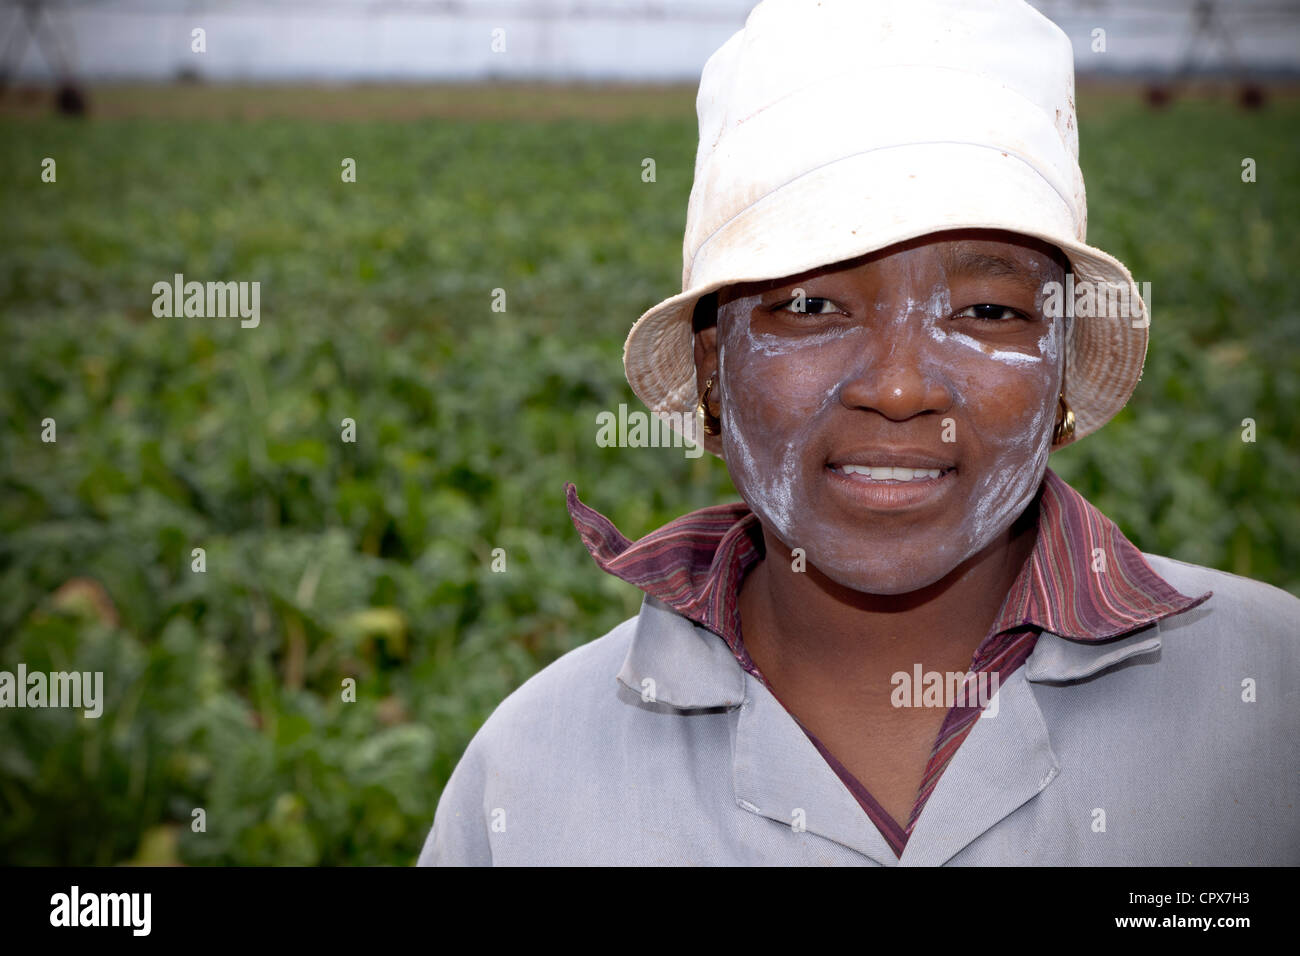 Farmworker poses in a vegetable field Stock Photo